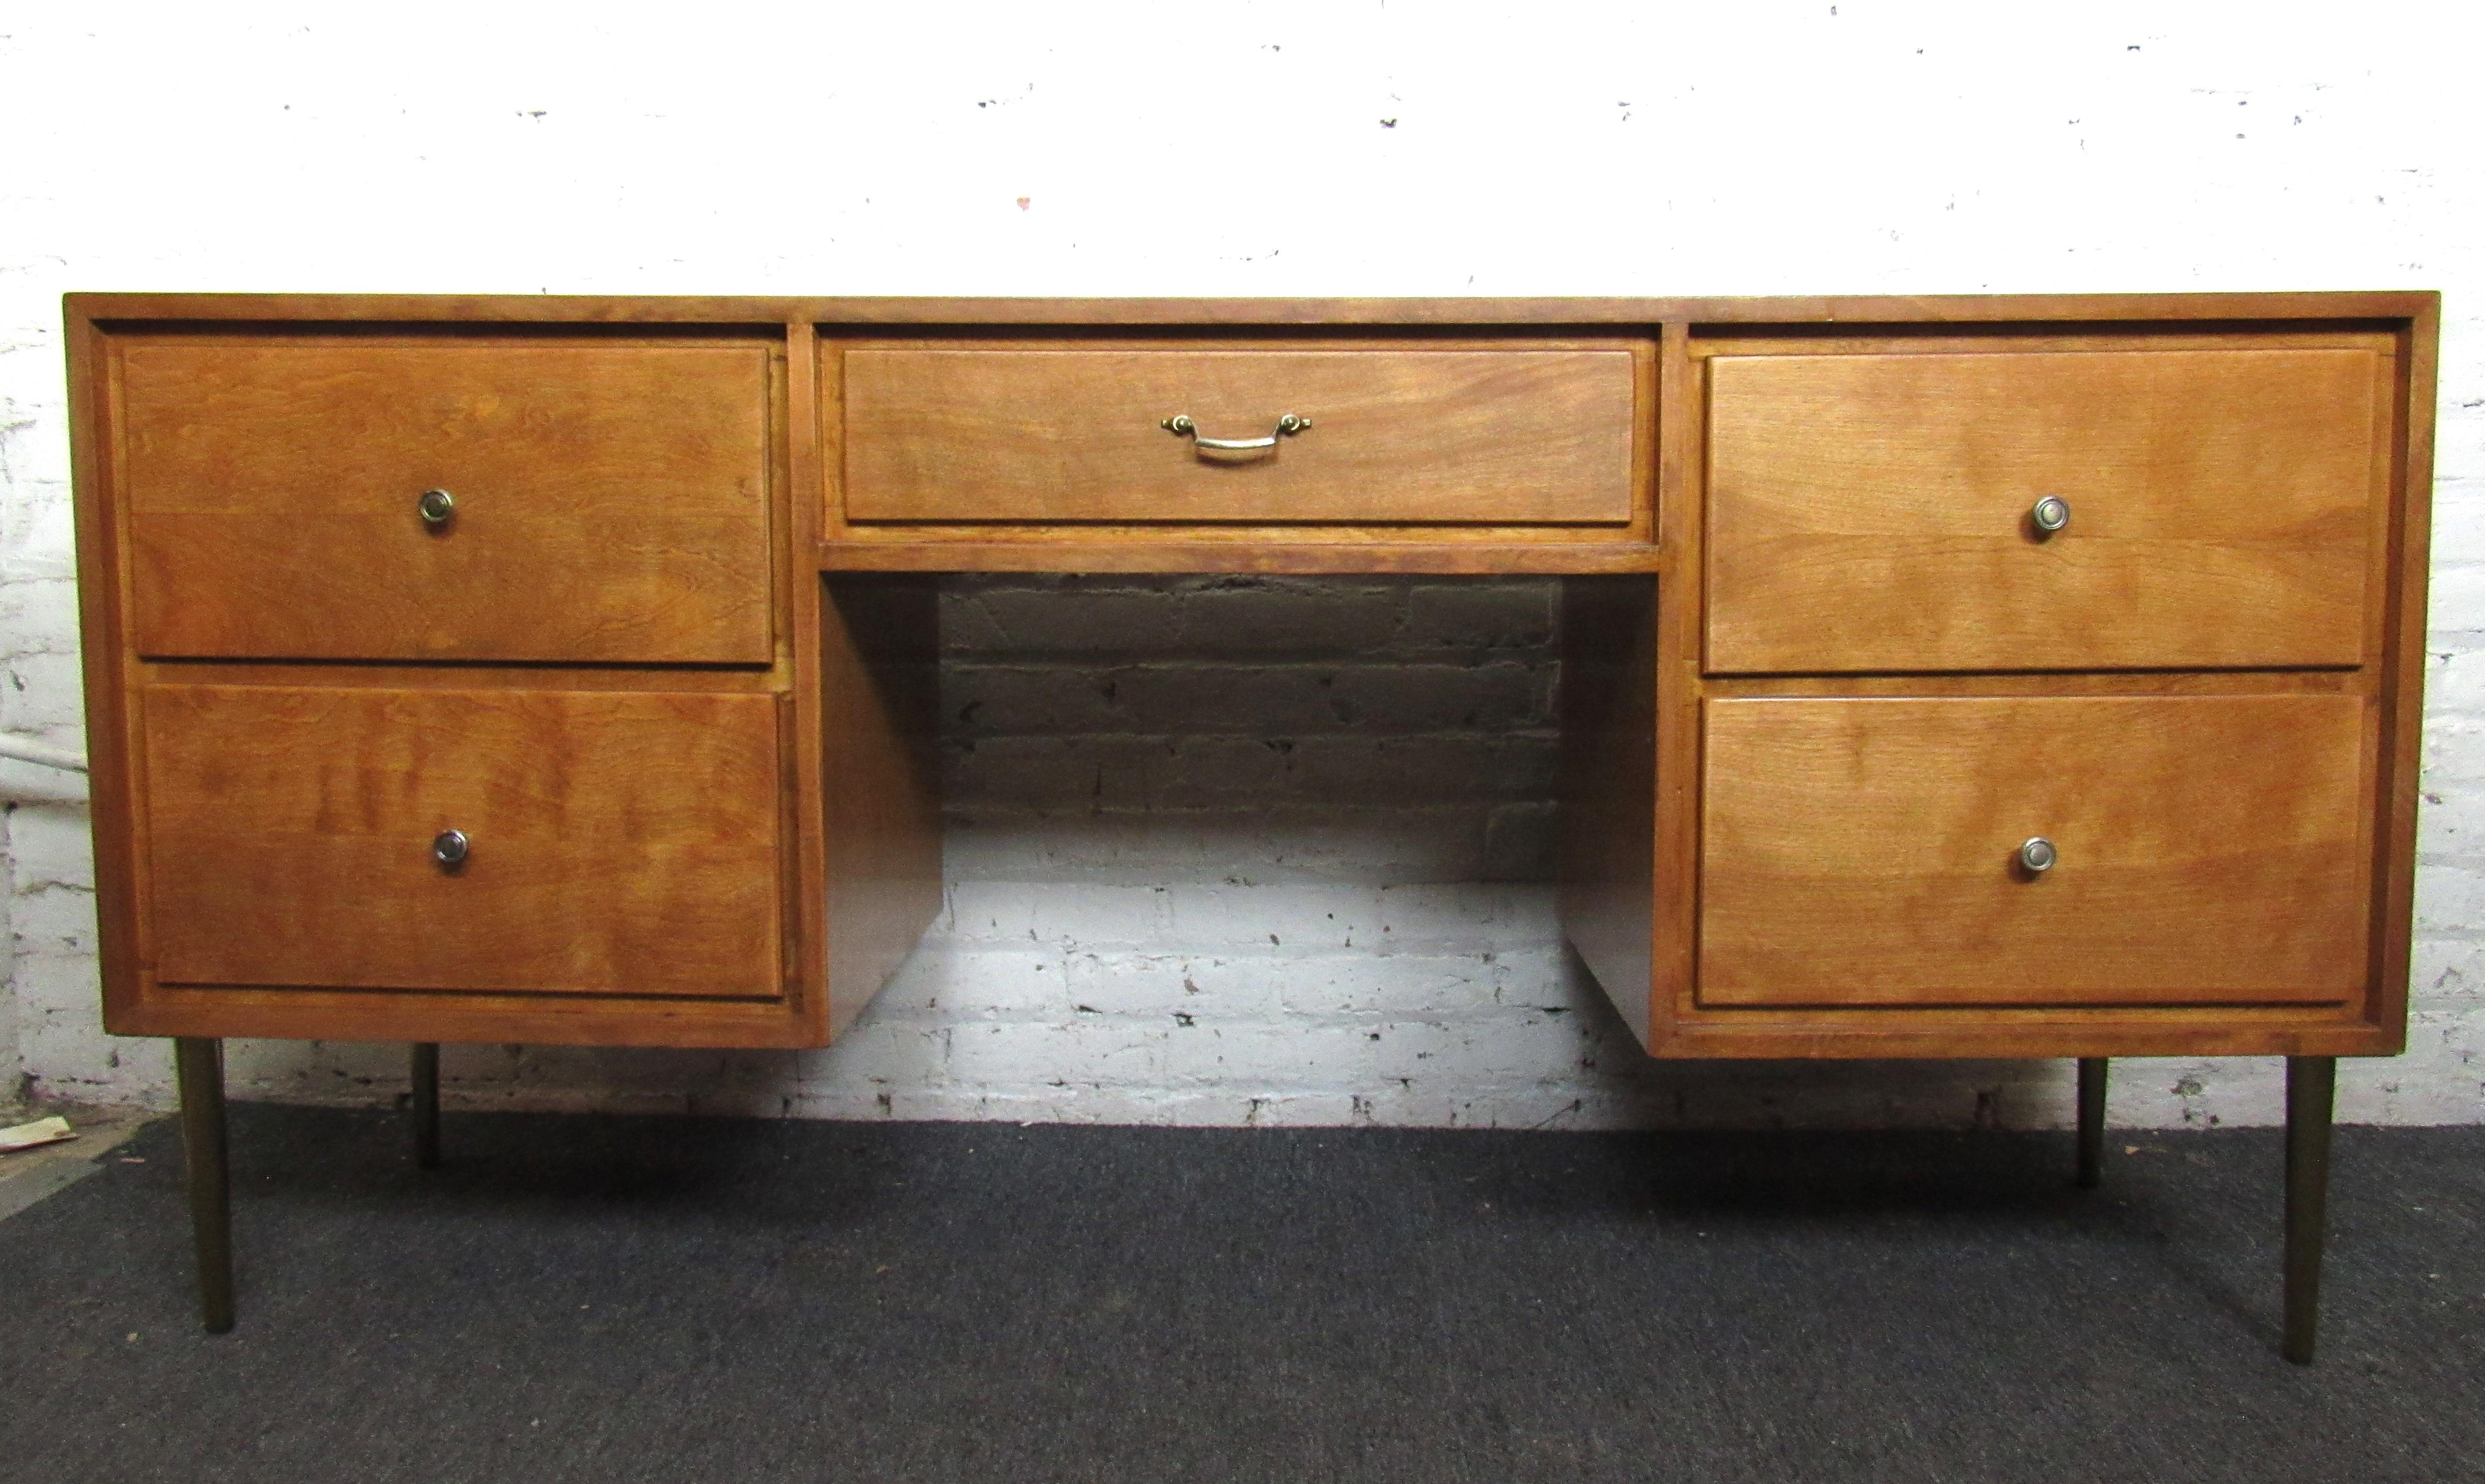 Beautiful vintage modern executive desk. This desk features four large drawers on either side of the desk, with a desk drawer in the middle. The wood is finished in a rich warm blonde color. New brass colored legs were added to the piece to